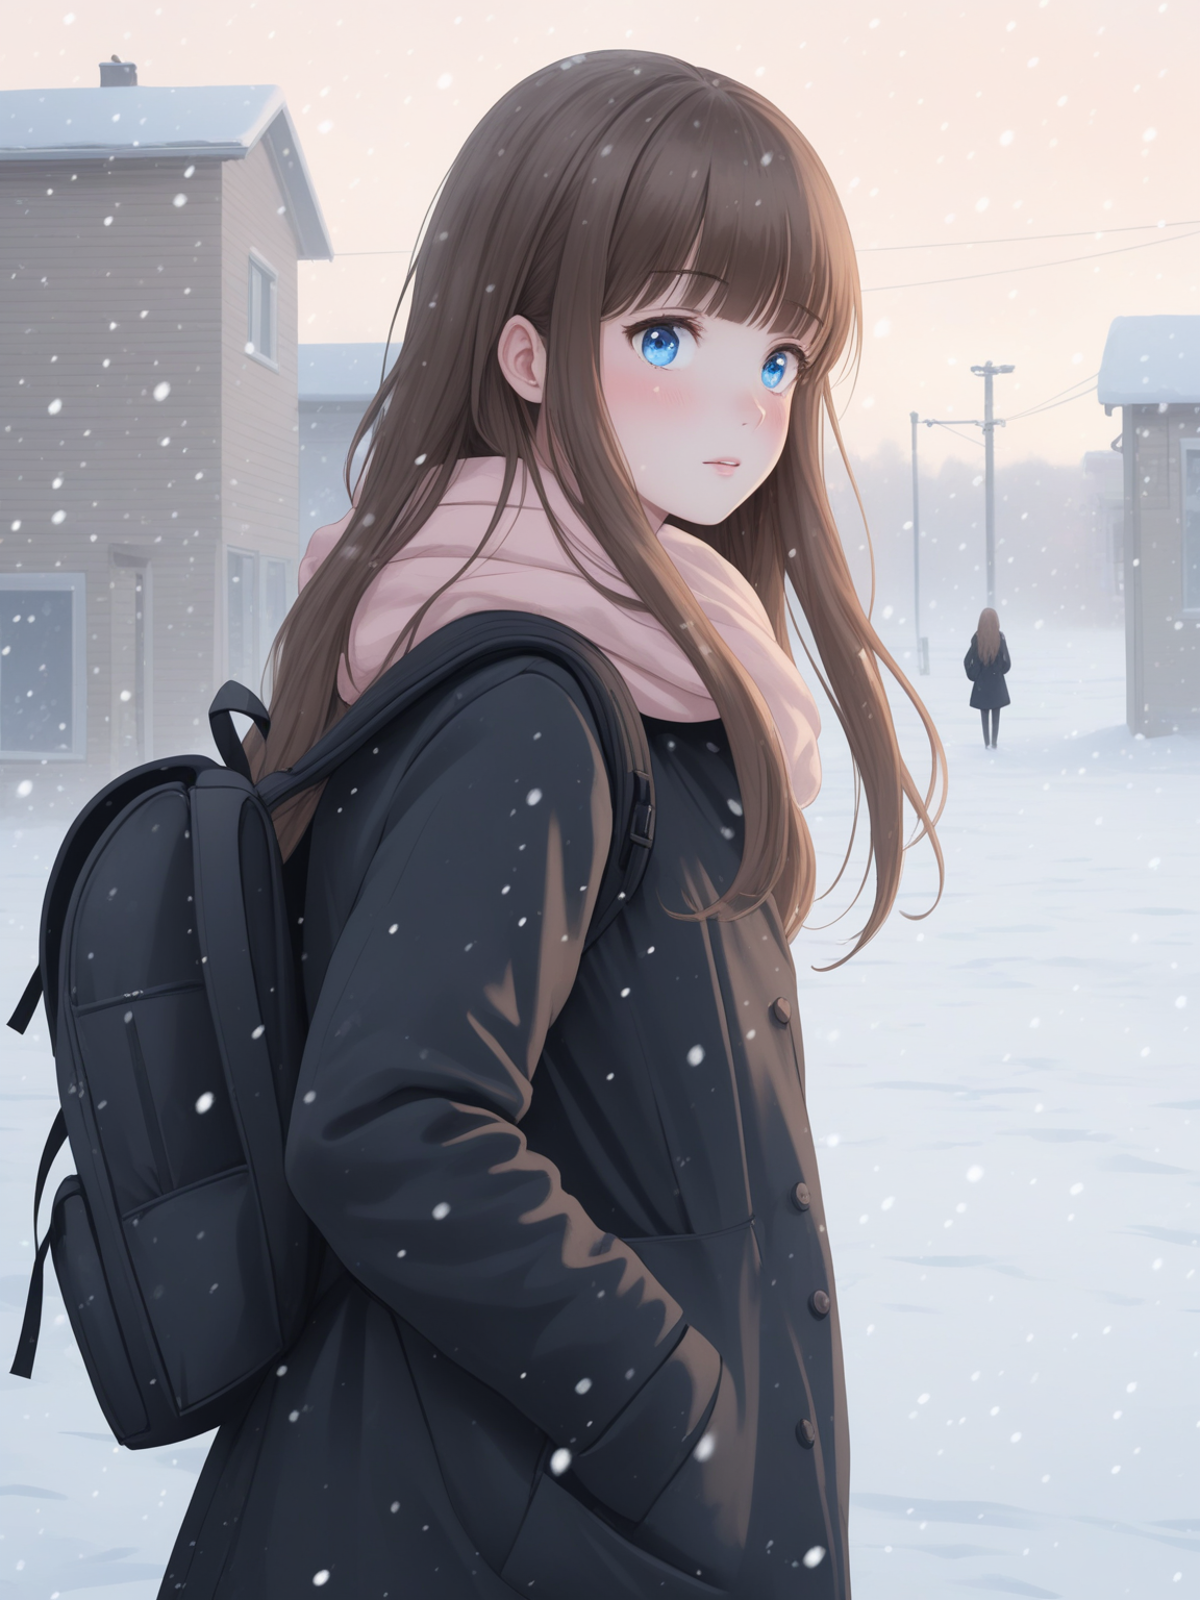 Dark-haired girl in a black coat with a pink scarf and a backpack walking in the snow.